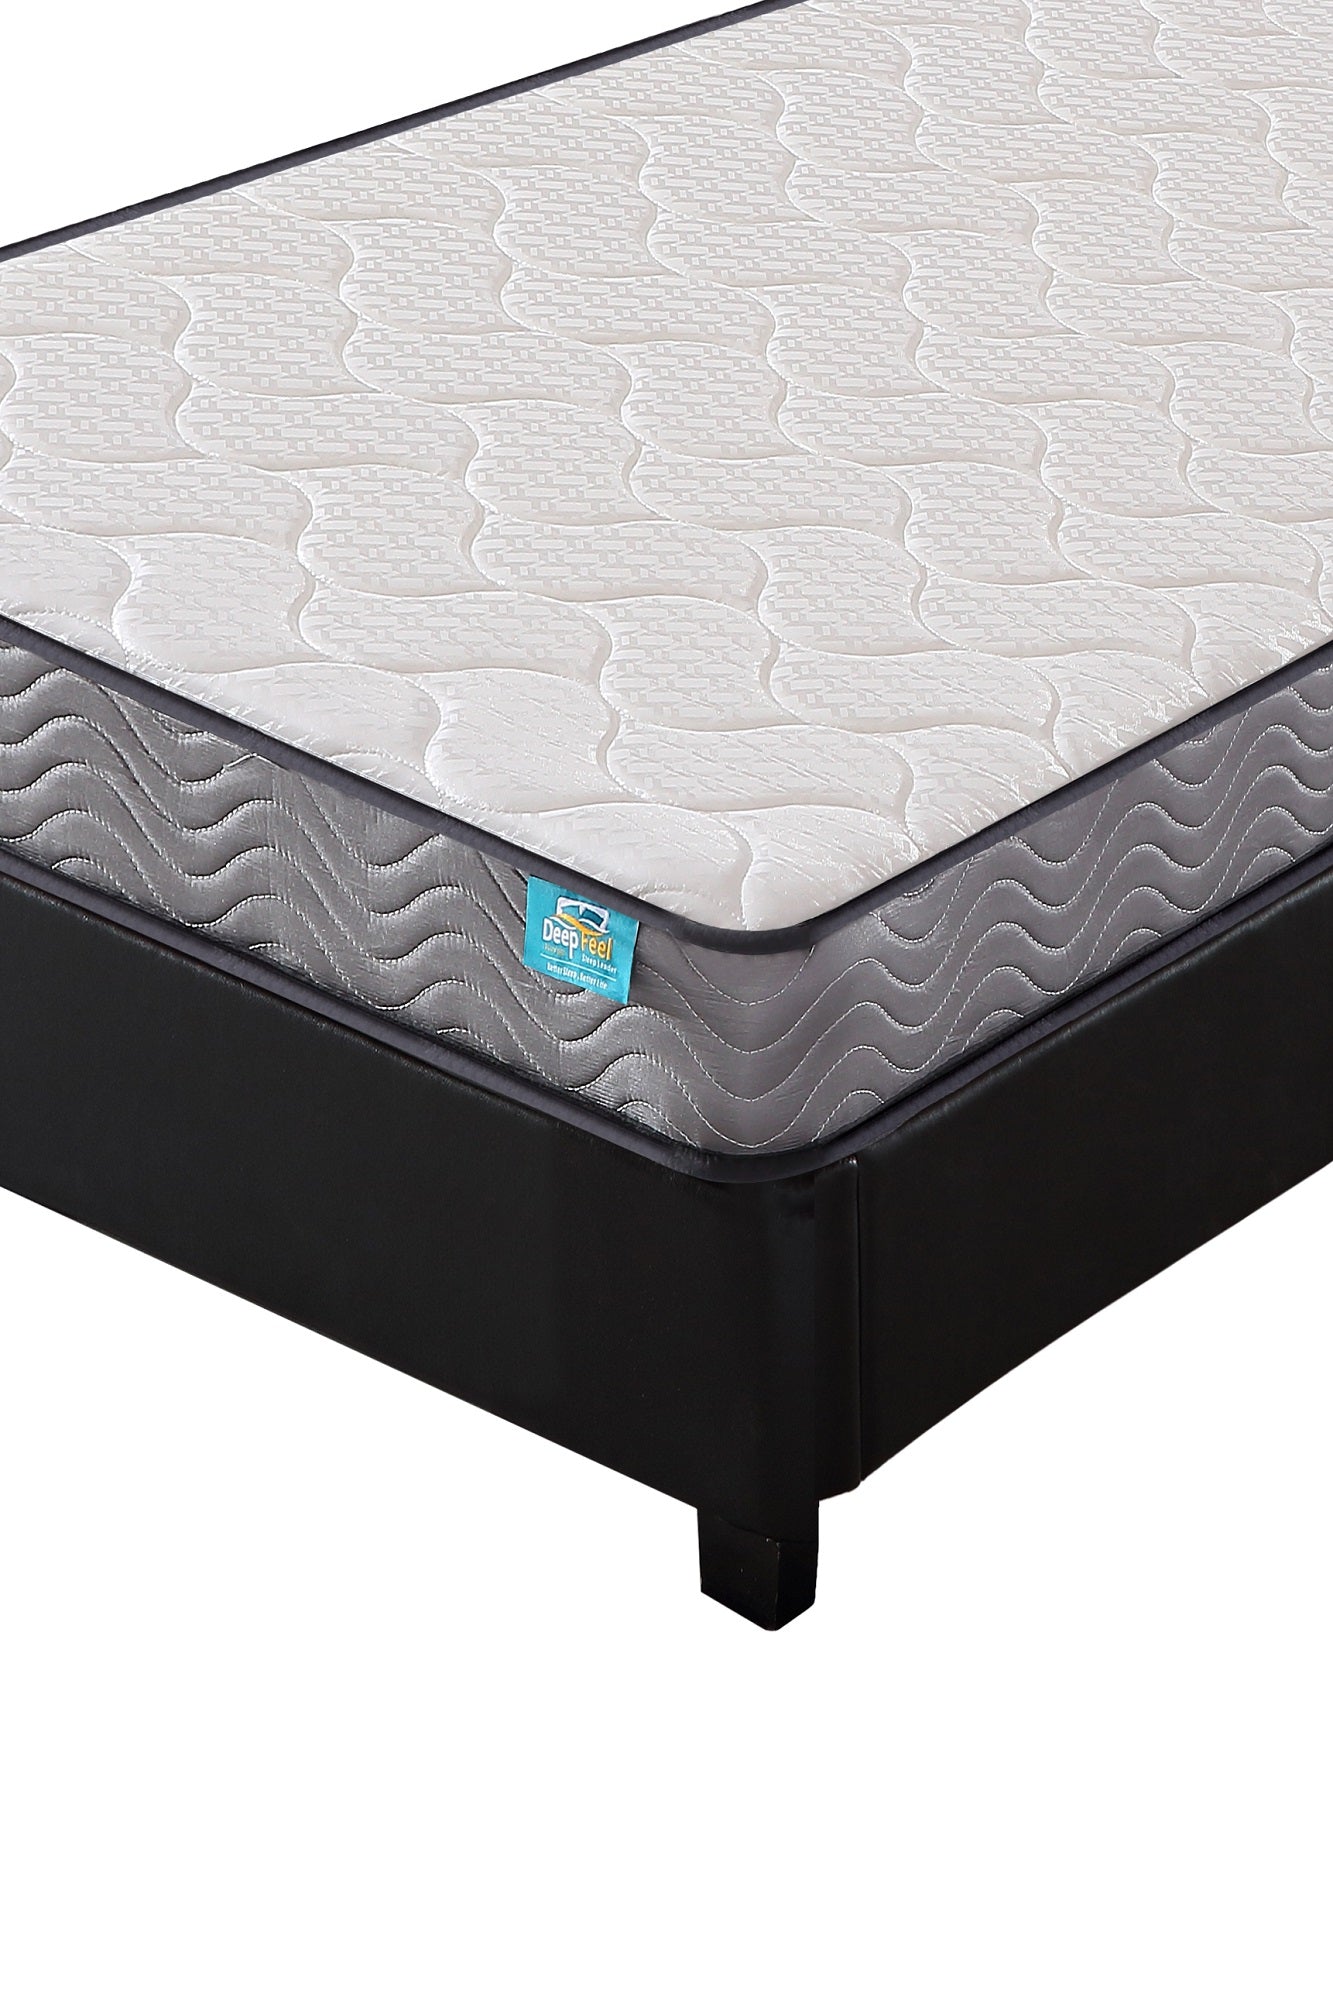 ViscoLogic SAVY Deep Feel Reversible High Density Foam Mattress for Guest Beds, Bunk Beds and Trundles (Twin)